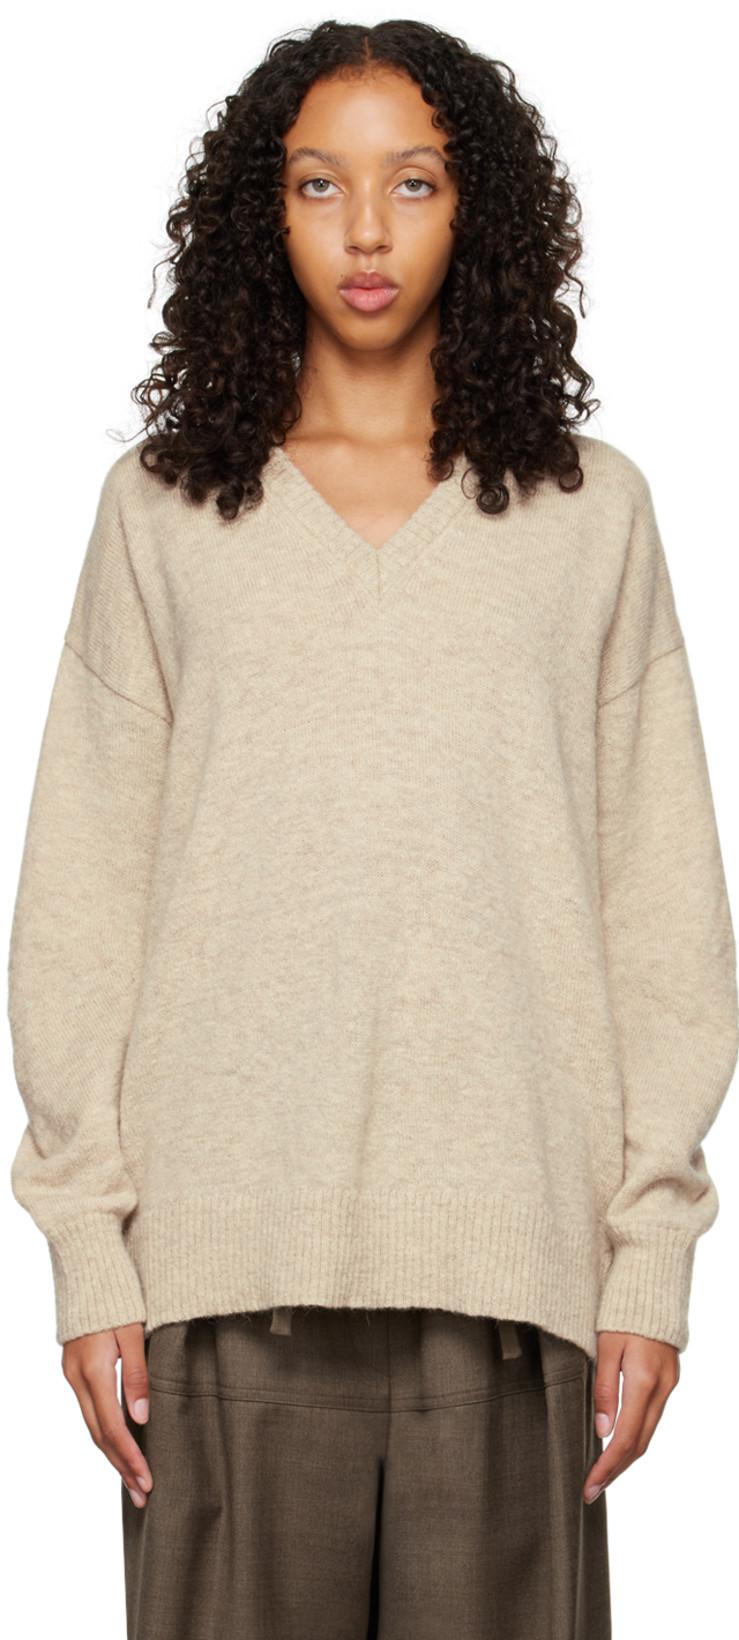 Beige V-Neck Sweater by CAES